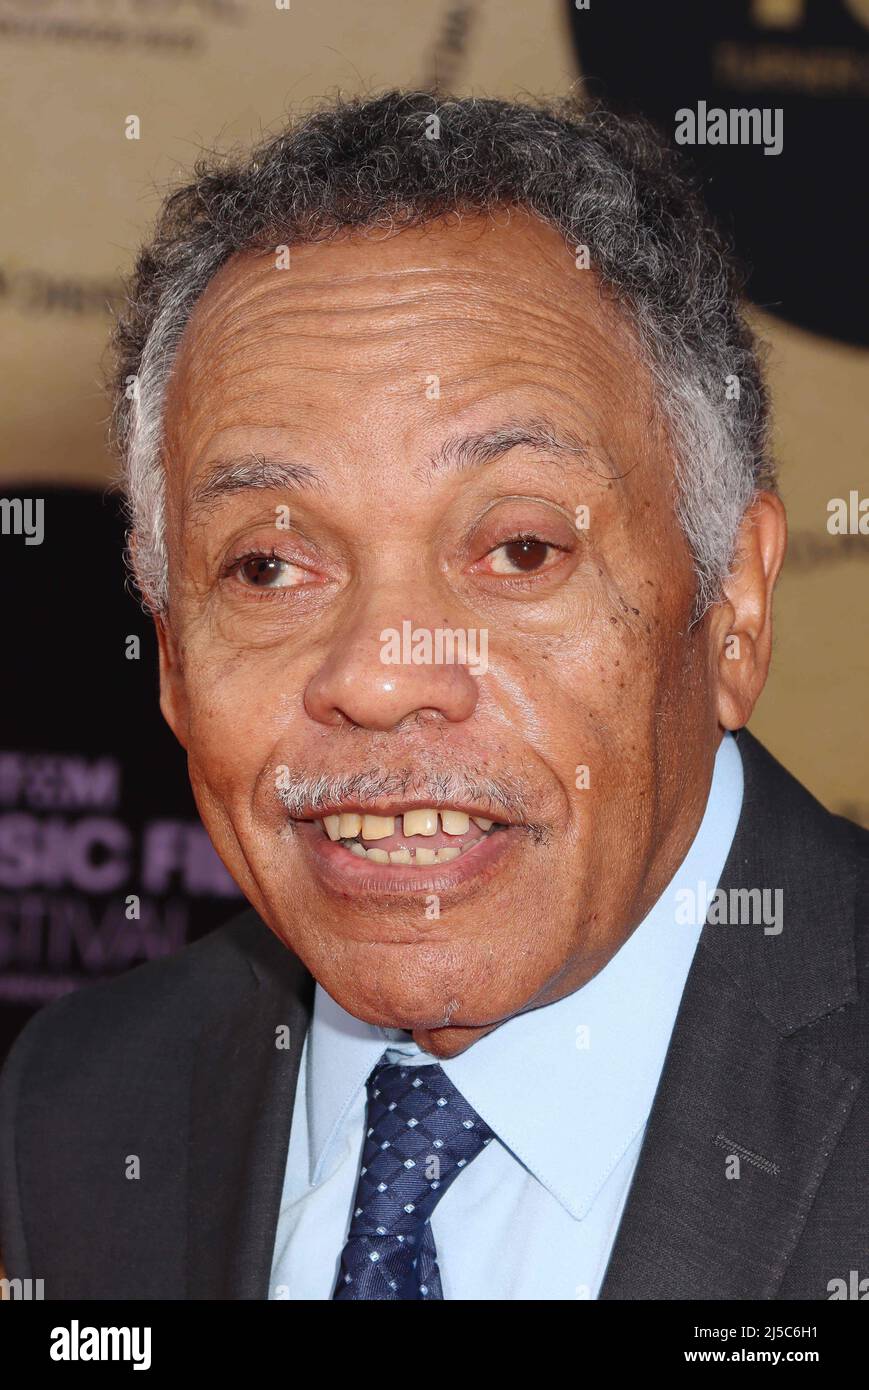 Los Angeles, USA. 21st Apr, 2022. Luis Reyes 2022/04/21 The 40th Anniversary Screening of “E.T. the Extra-Terrestrial” held at TCL Chinese Theatre in Hollywood, CA, Credit: Cronos/Alamy Live News Stock Photo